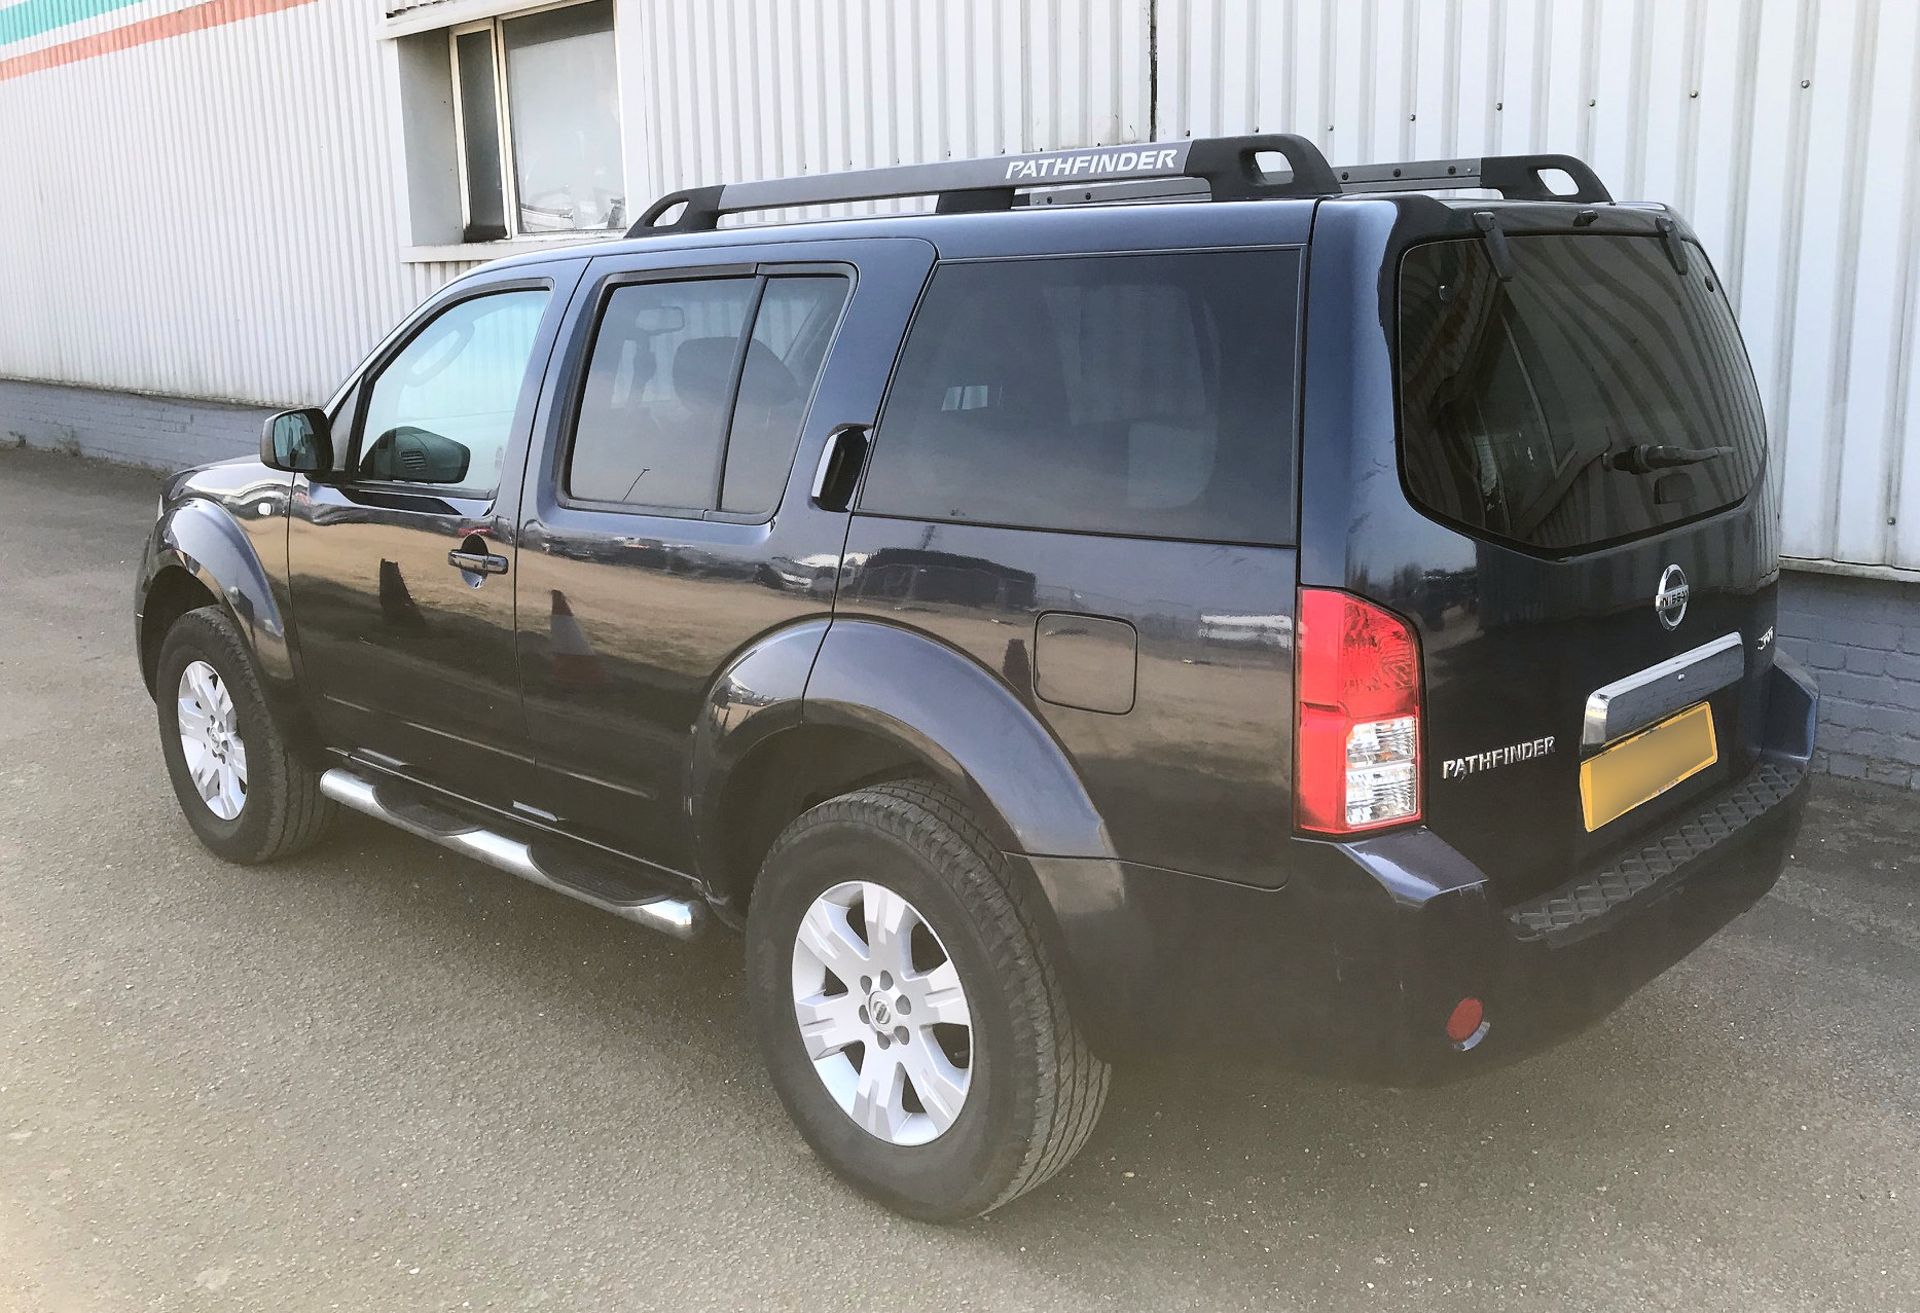 2007 Nissan Pathfinder 2.5 Dci Sport 7 Seater 5 Door 4x4 - CL505 - Location: Corby, Northamptonshire - Image 2 of 10